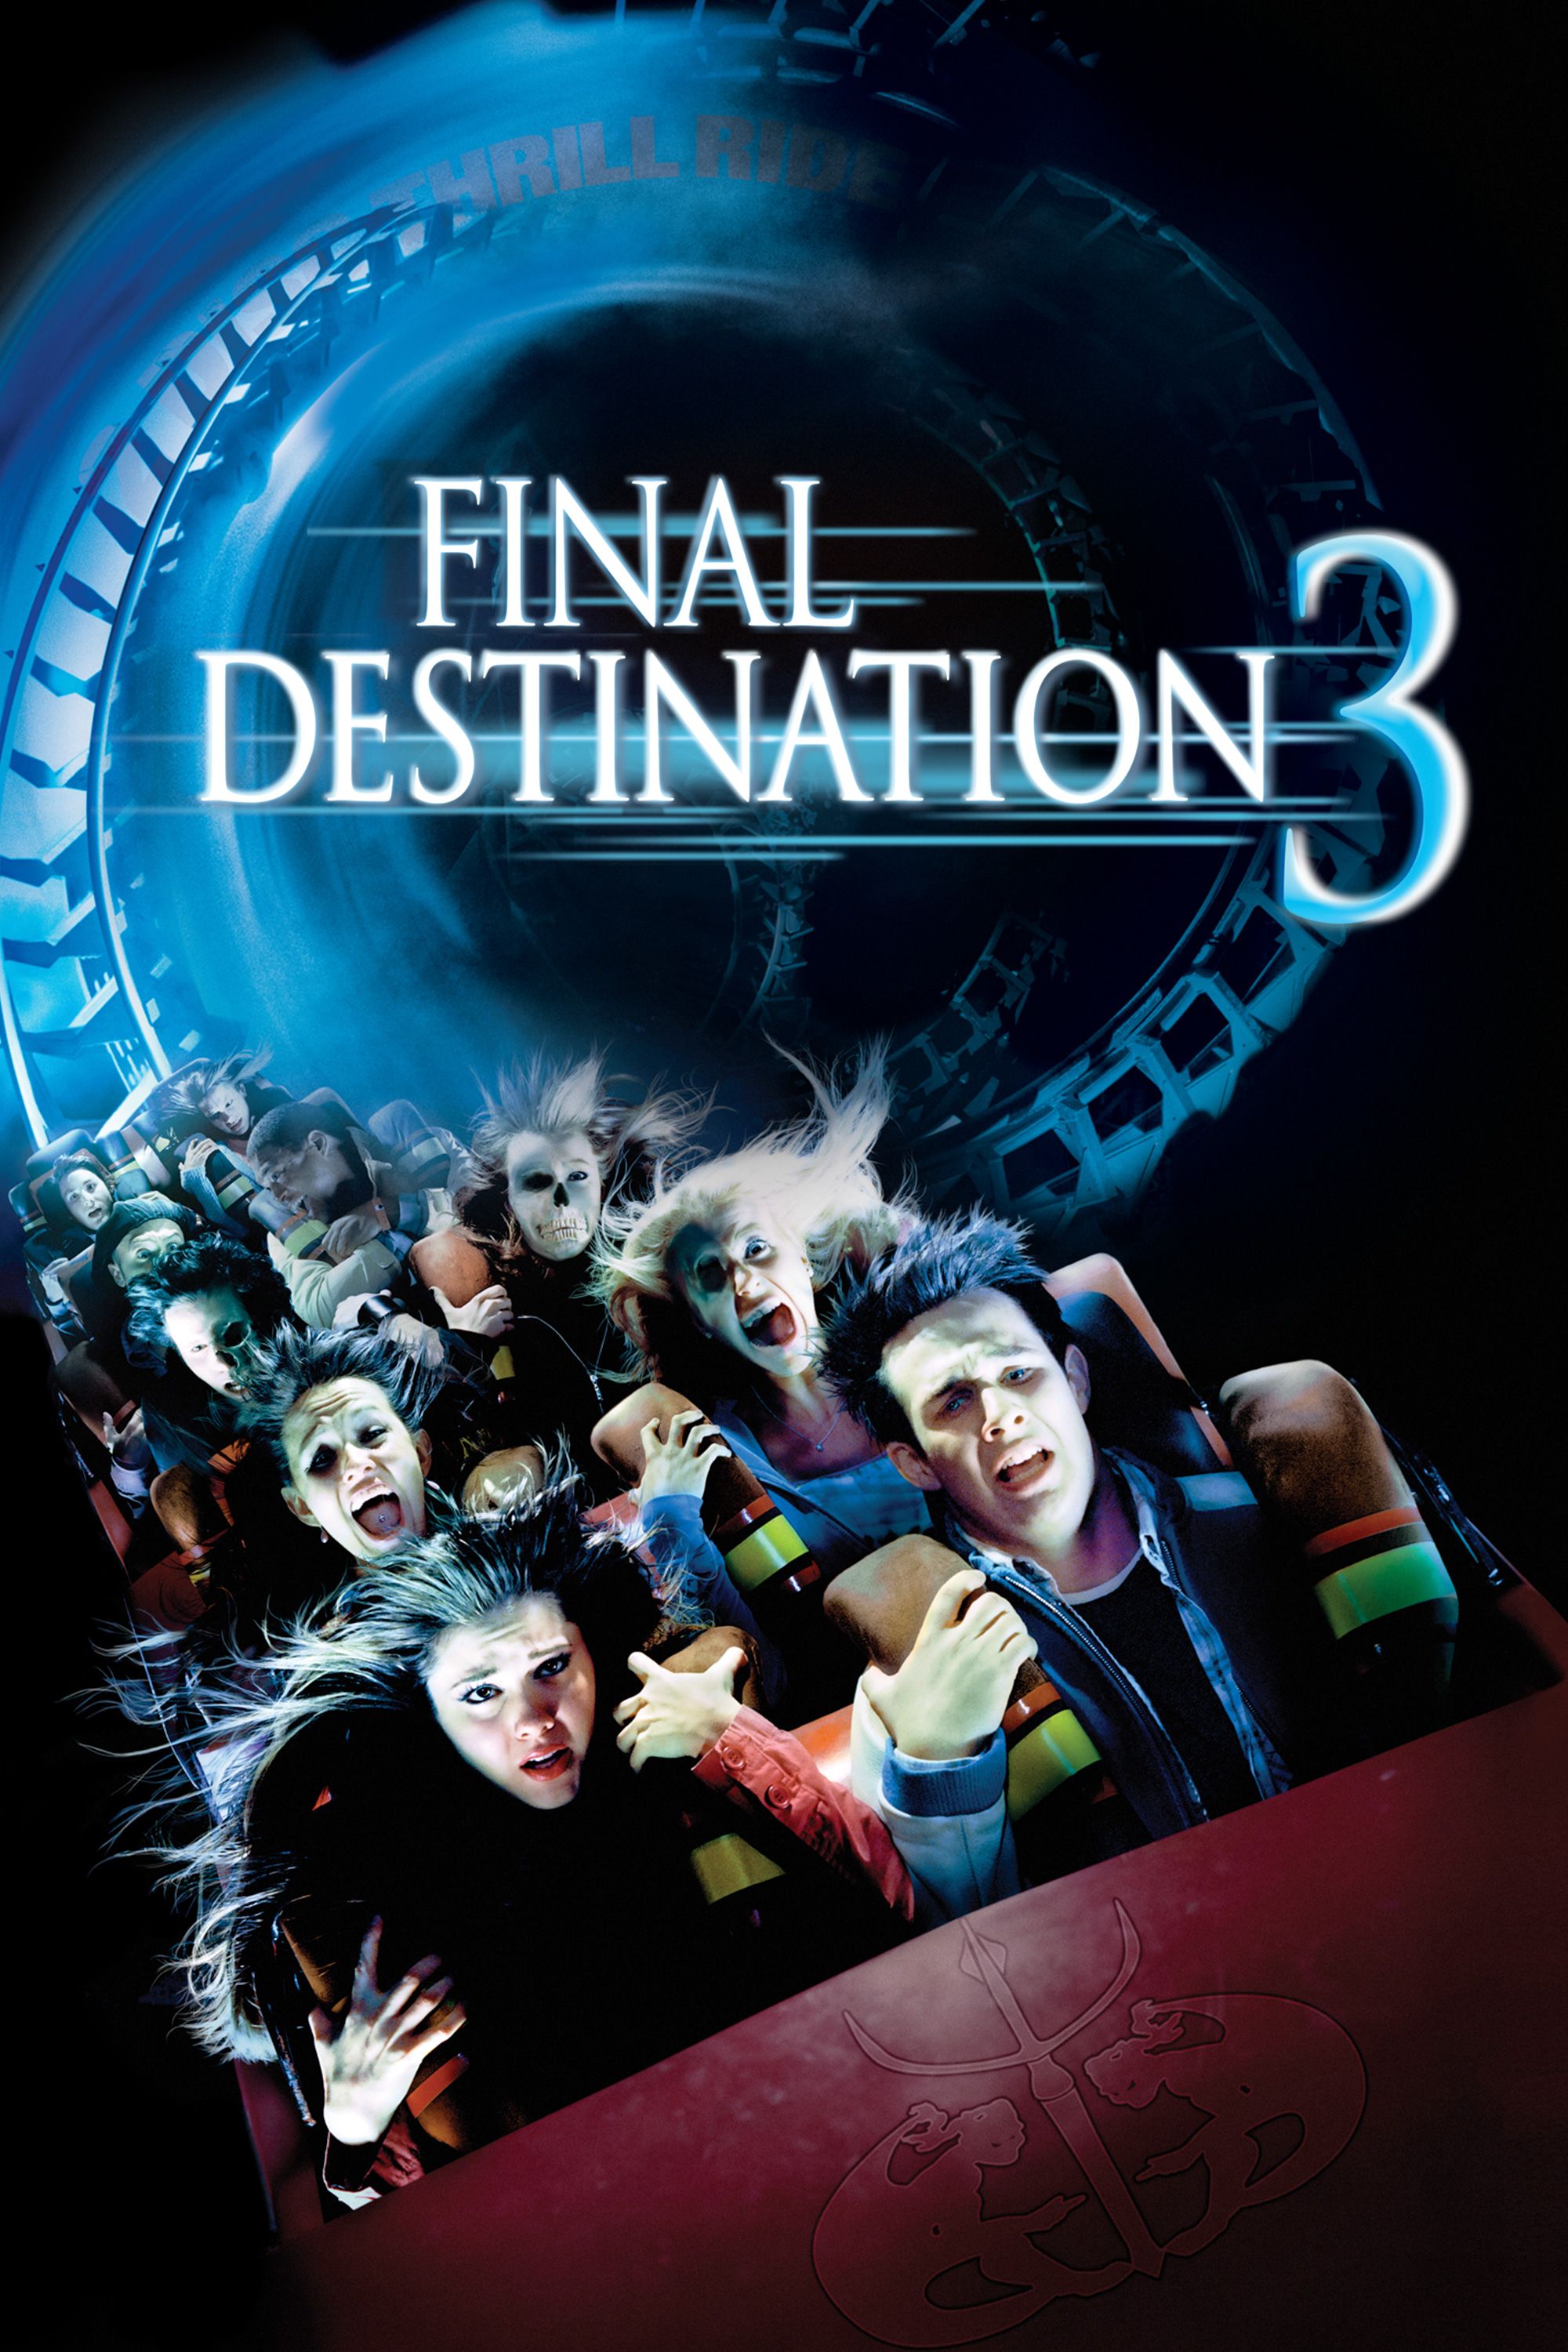 Exploring the Thrills and Chills of the "Final Destination" Movie Series